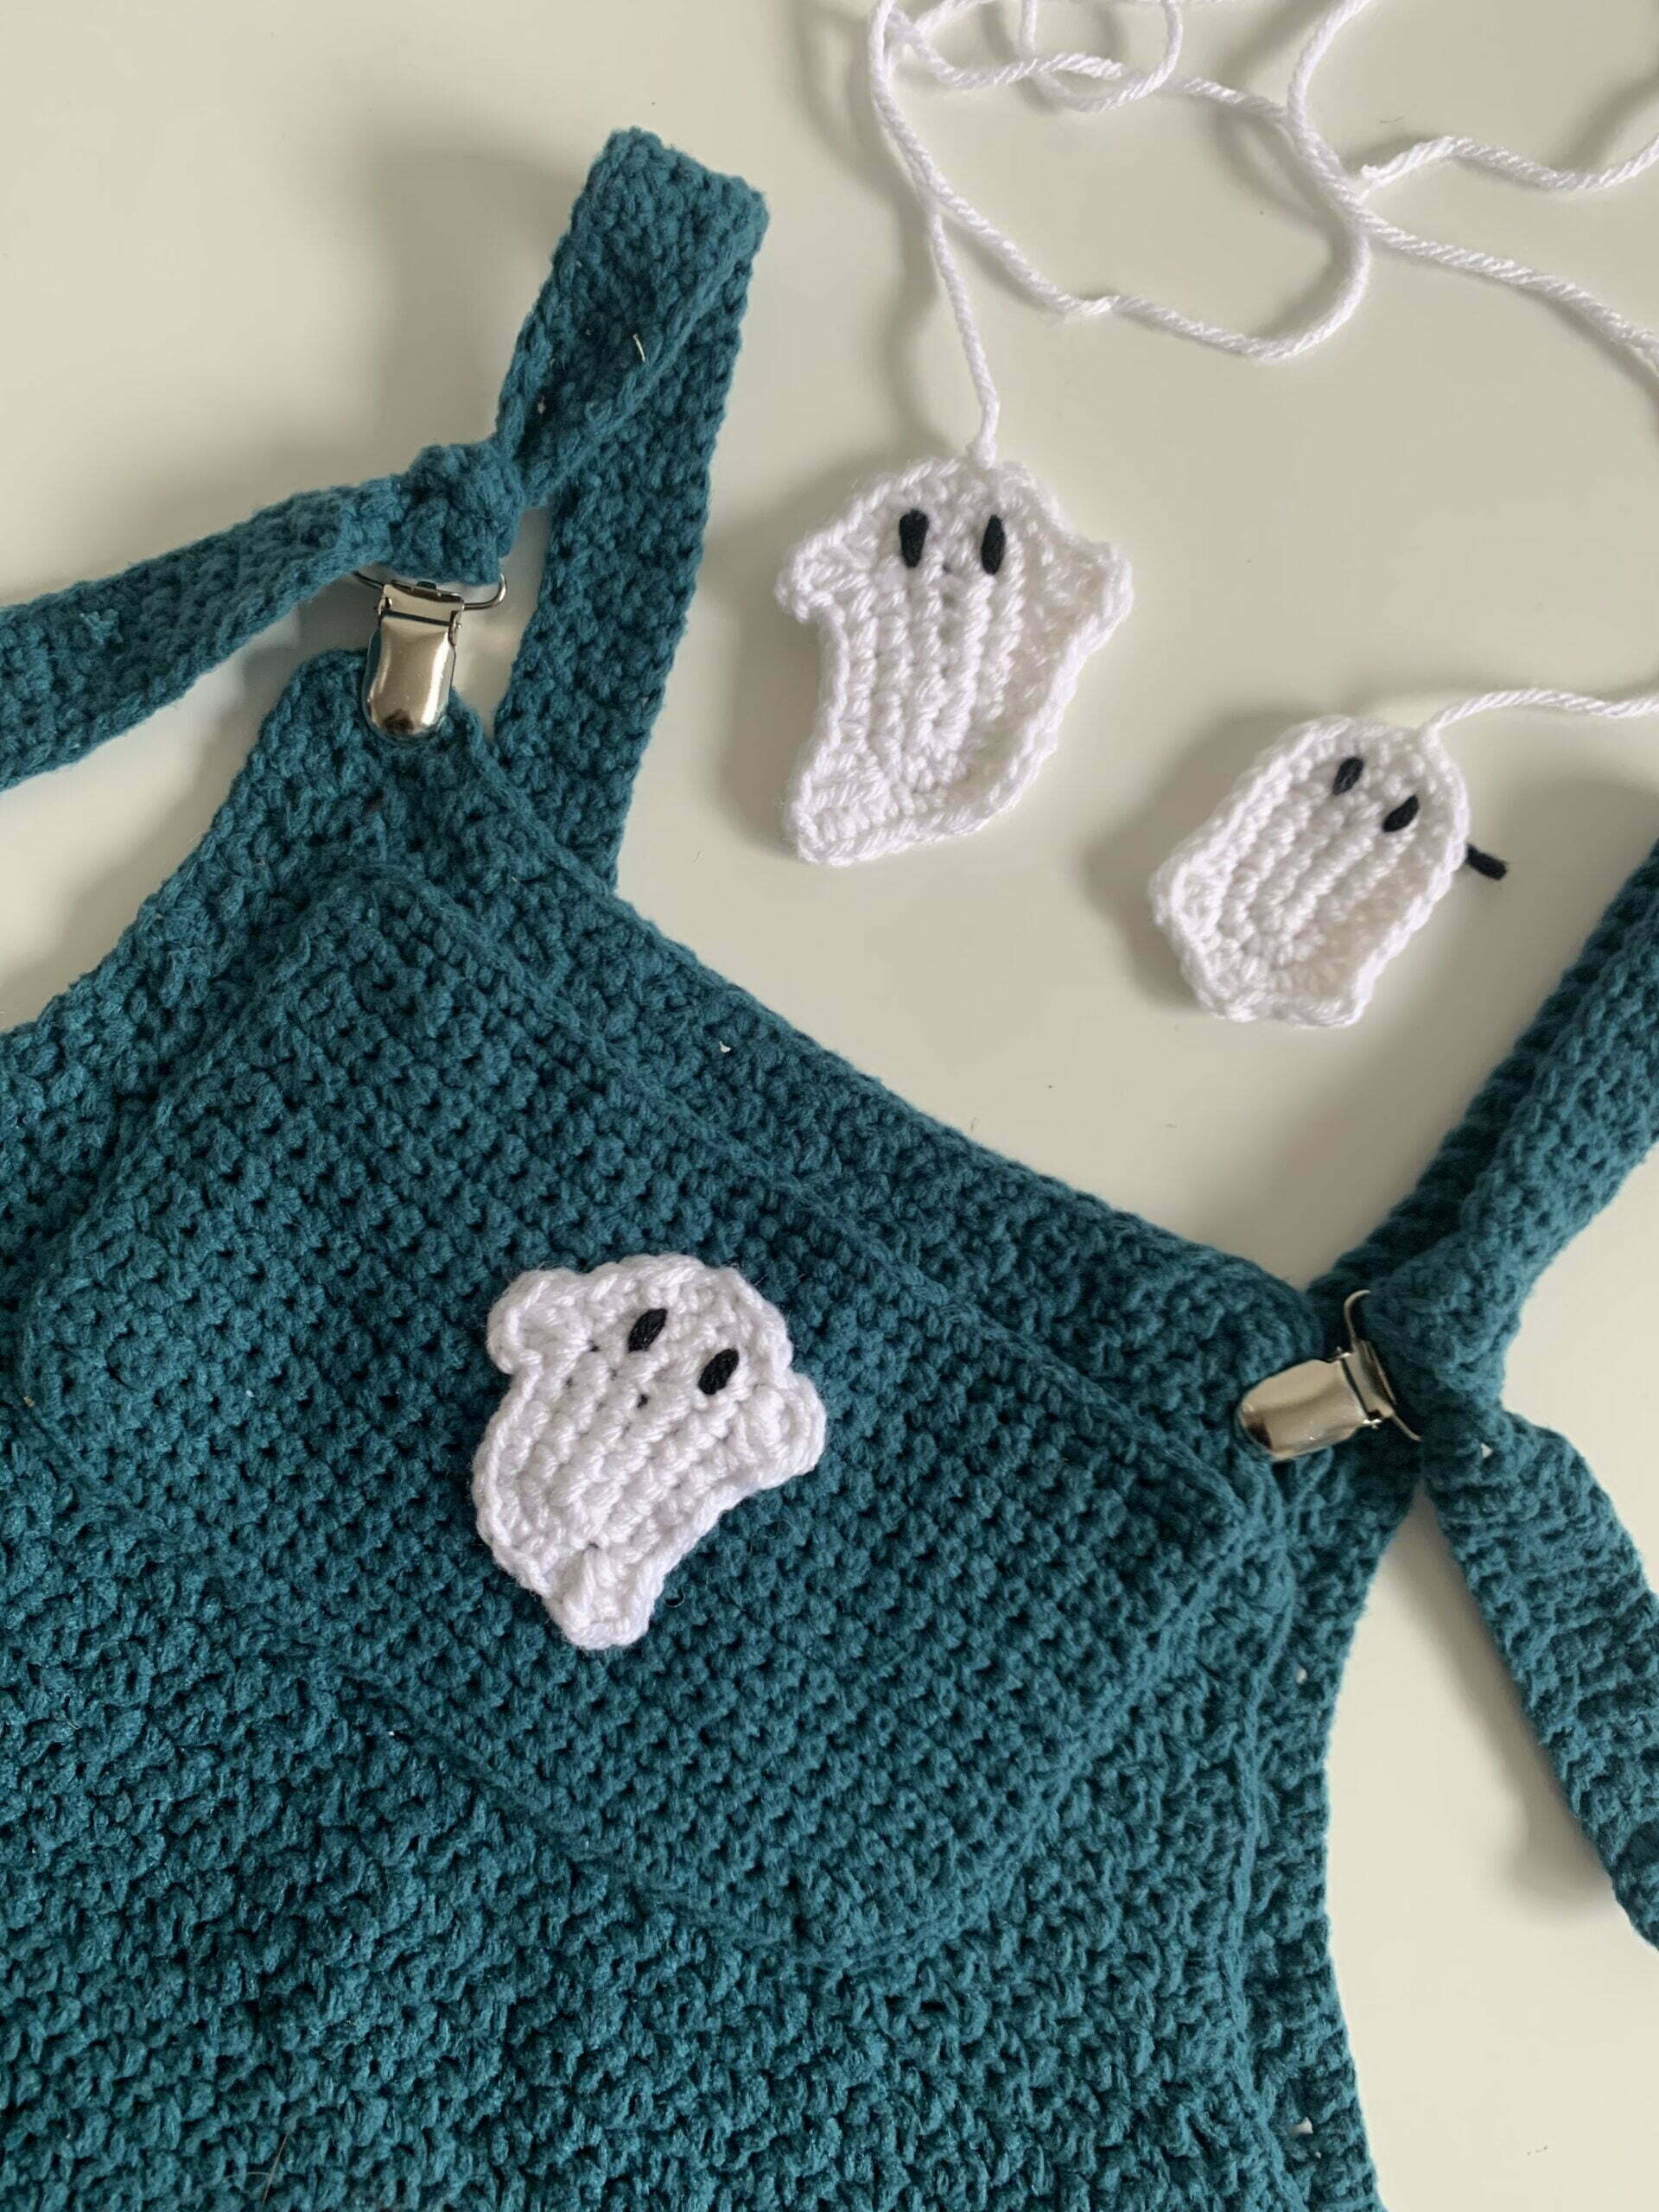 8 Spooky Crochet Halloween Projects to Haunt Your Home - Easy Crochet  Patterns